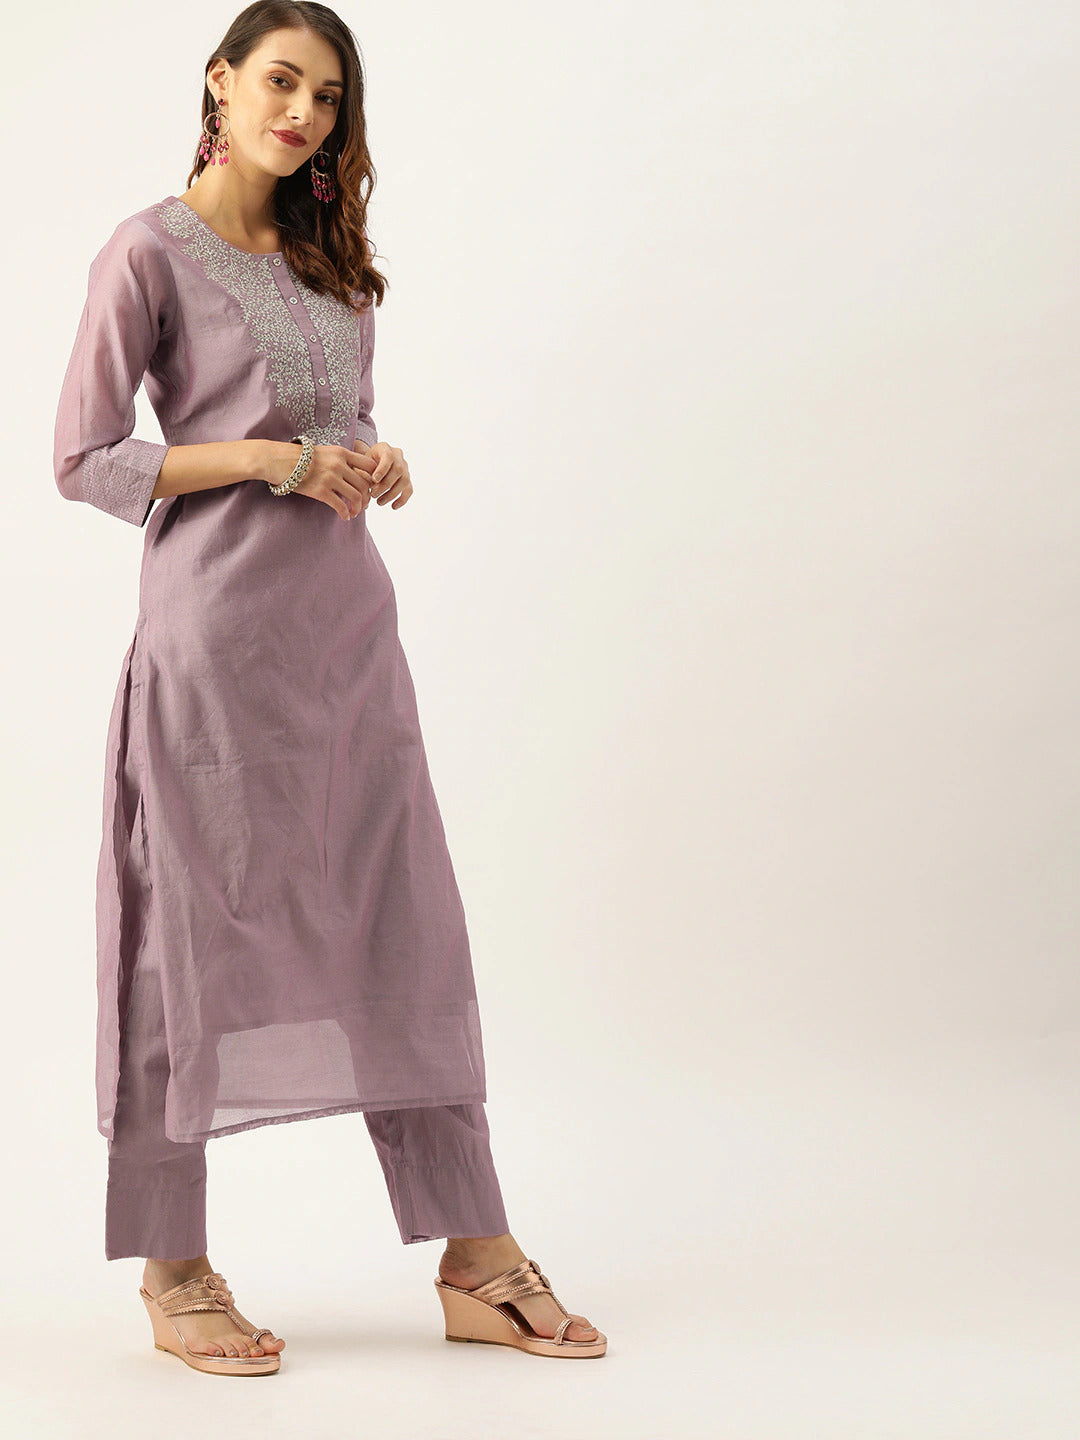 Mauve Silk Kurta Set - Indian Clothing in Denver, CO, Aurora, CO, Boulder, CO, Fort Collins, CO, Colorado Springs, CO, Parker, CO, Highlands Ranch, CO, Cherry Creek, CO, Centennial, CO, and Longmont, CO. Nationwide shipping USA - India Fashion X